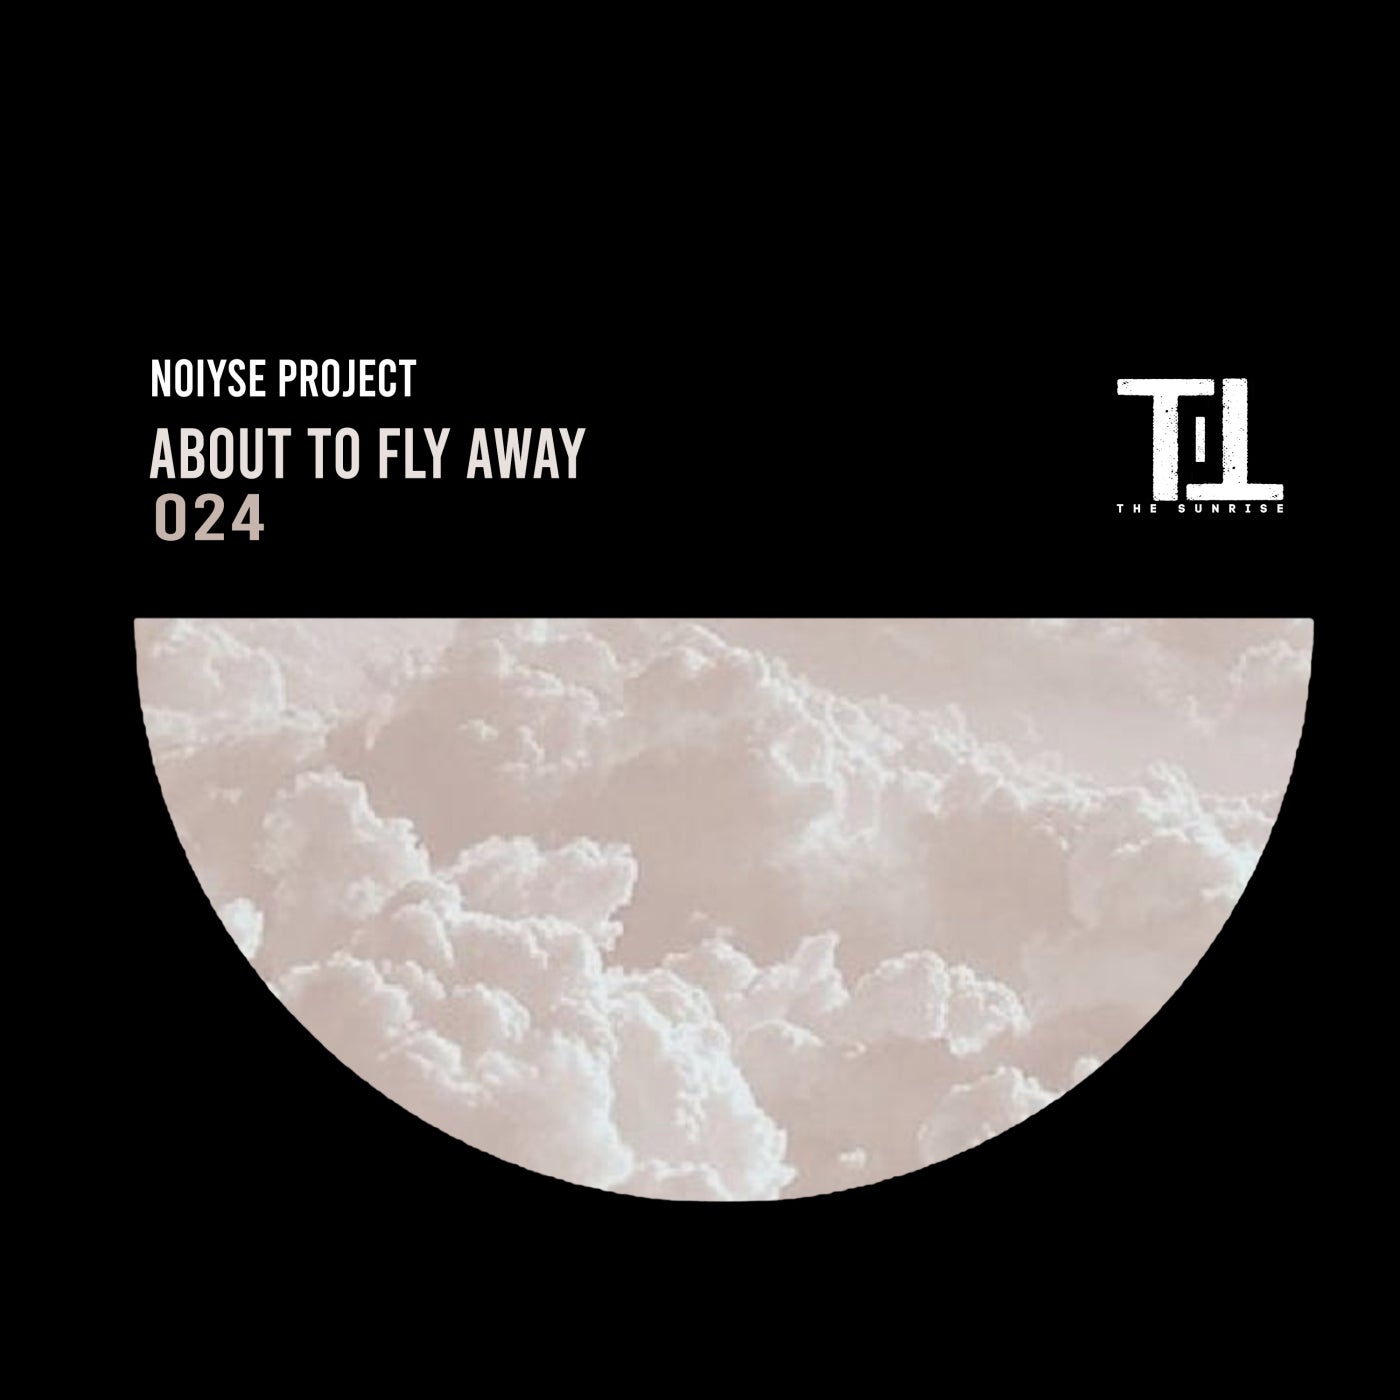 Cover - NOIYSE PROJECT - About to Fly Away (Original Mix)